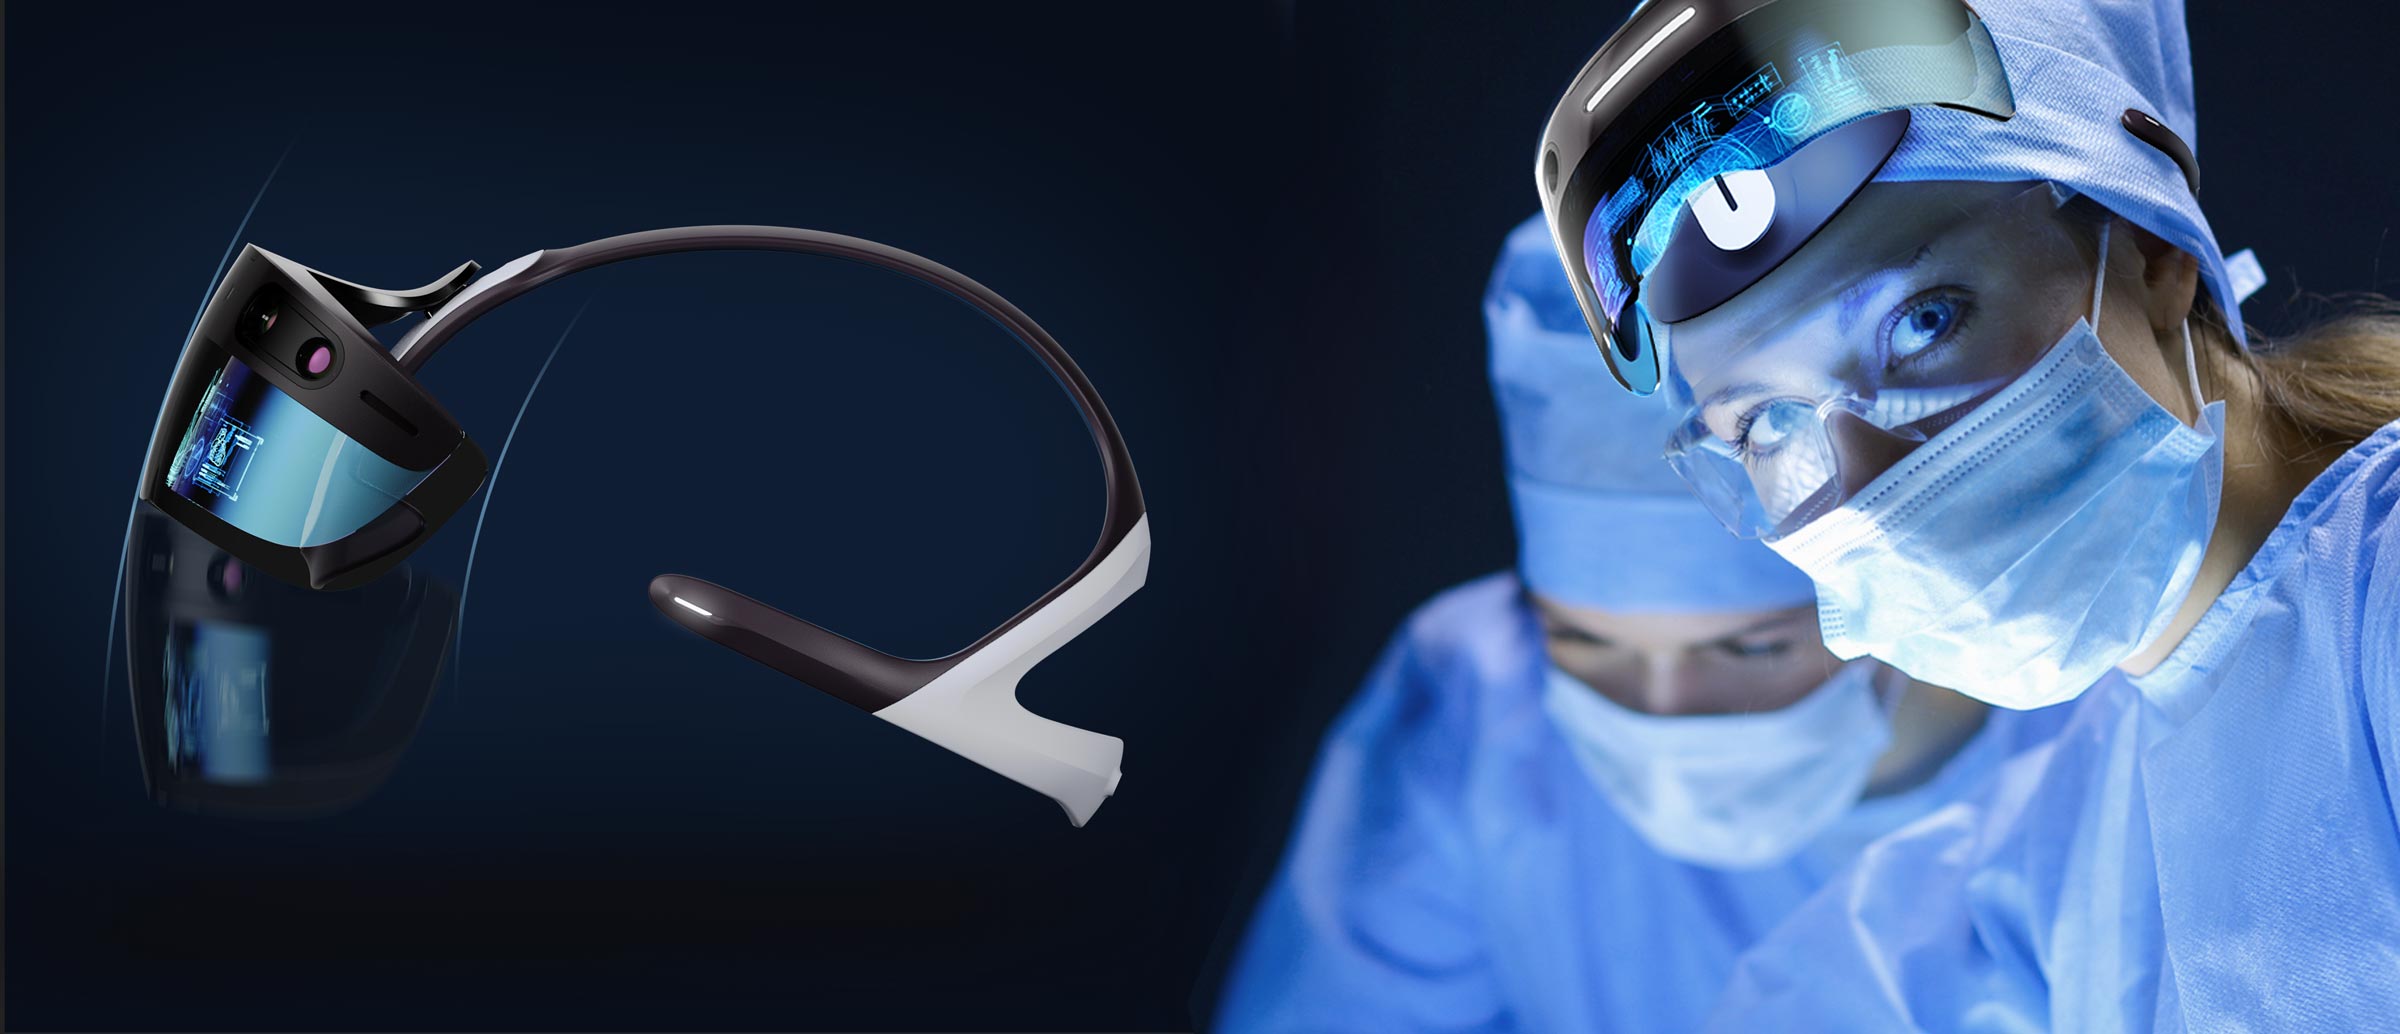 Surgeon using the Medical AR headset during surgery